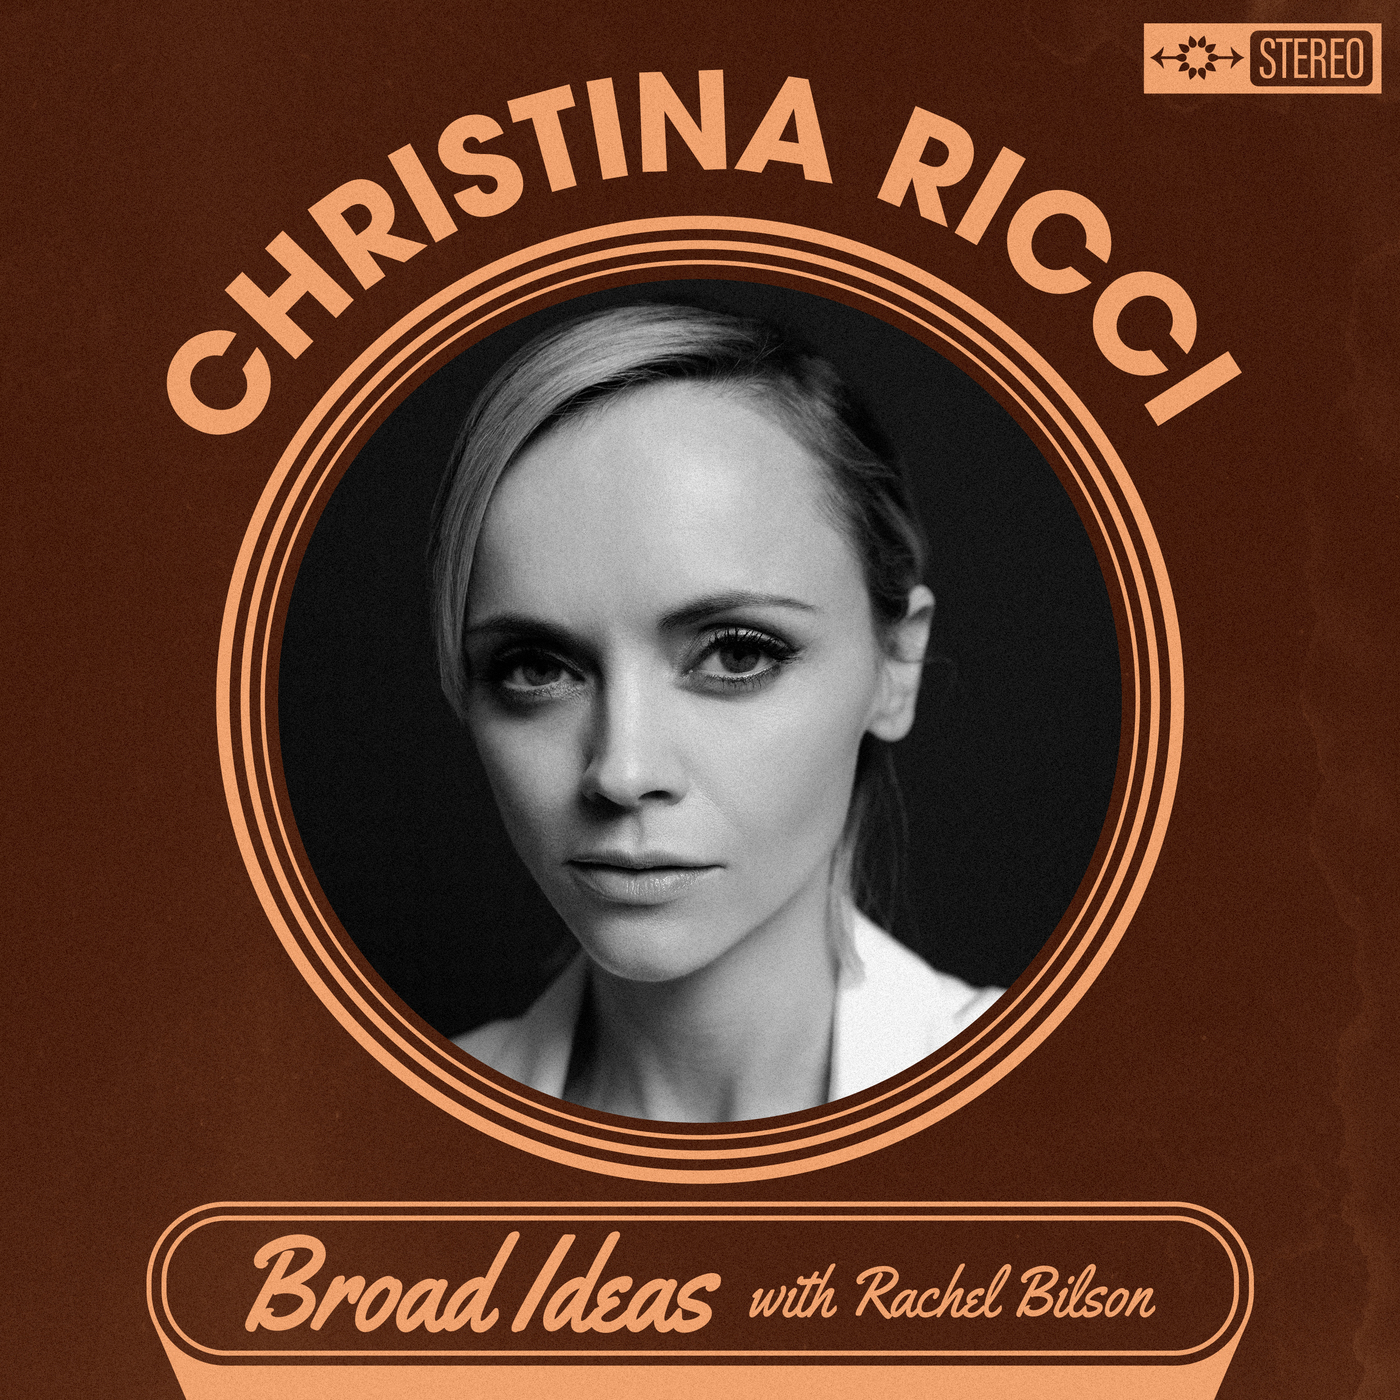 Christina Ricci on PTSD, Insincere Apologies, and Women Objectifying Women